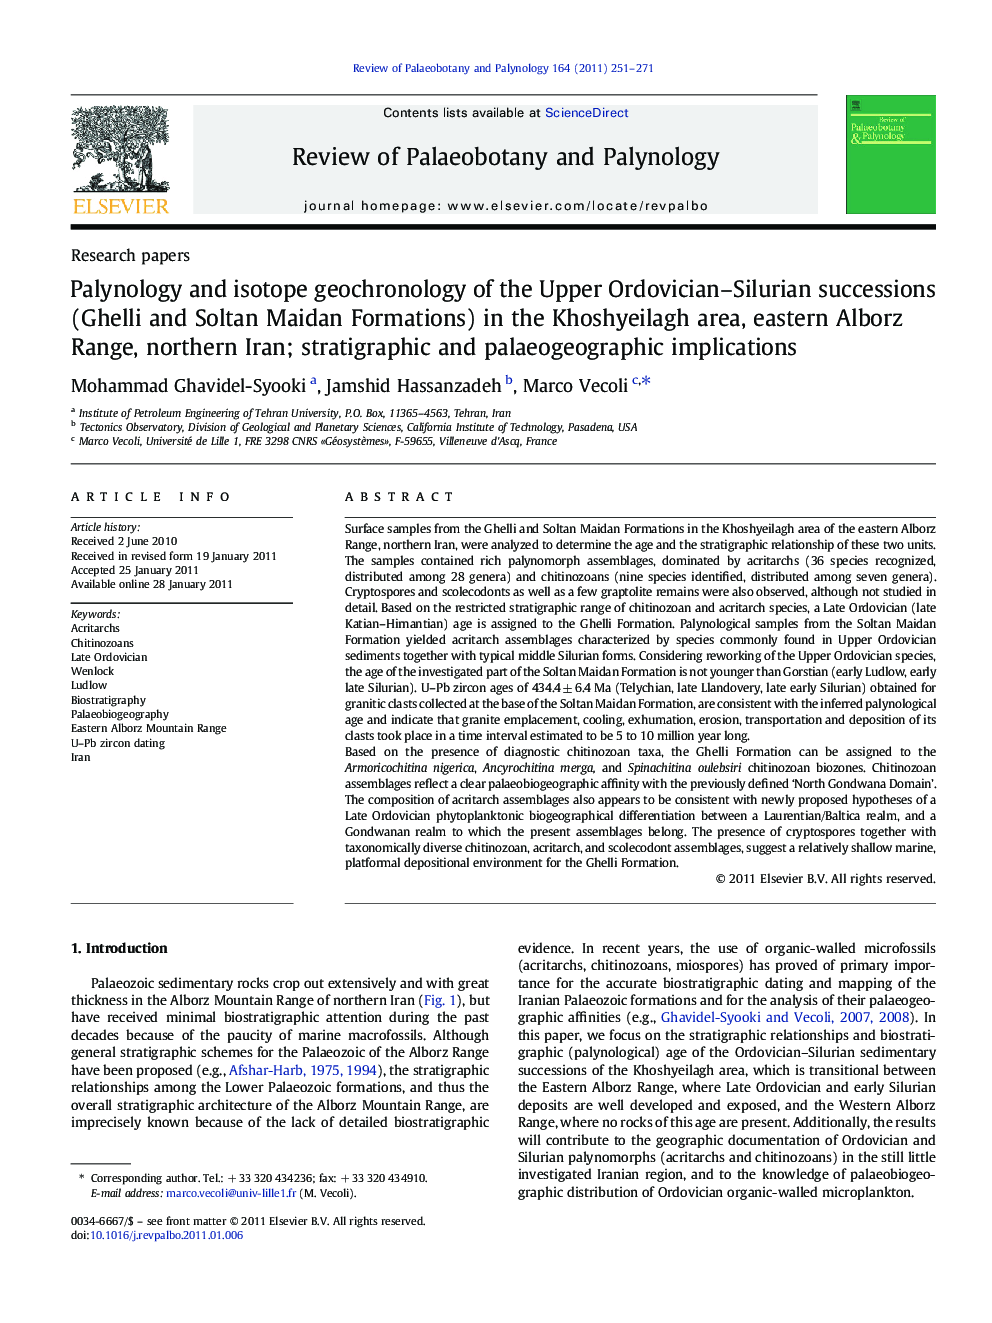 Palynology and isotope geochronology of the Upper Ordovician–Silurian successions (Ghelli and Soltan Maidan Formations) in the Khoshyeilagh area, eastern Alborz Range, northern Iran; stratigraphic and palaeogeographic implications